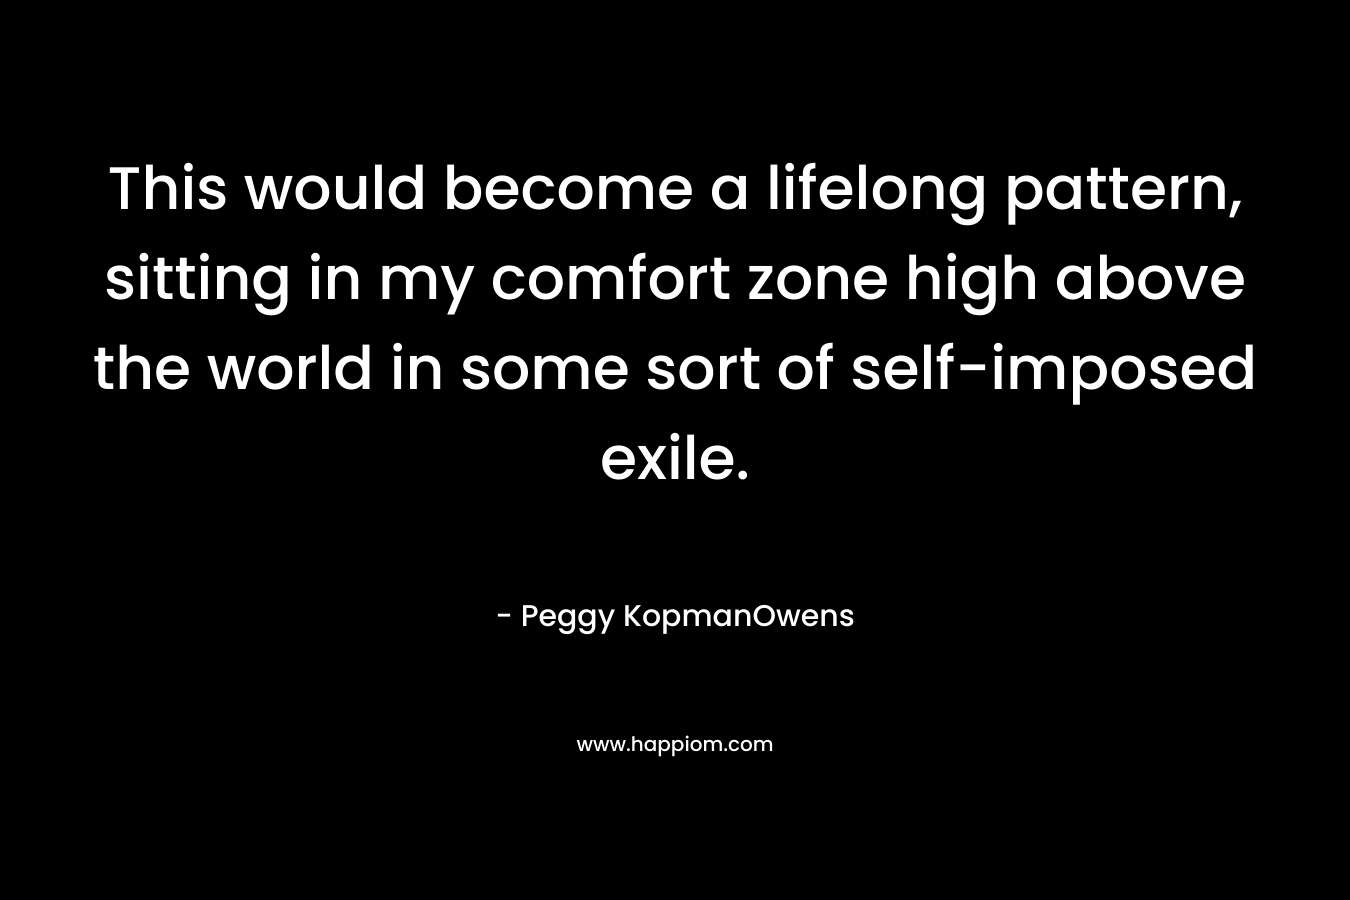 This would become a lifelong pattern, sitting in my comfort zone high above the world in some sort of self-imposed exile. – Peggy KopmanOwens